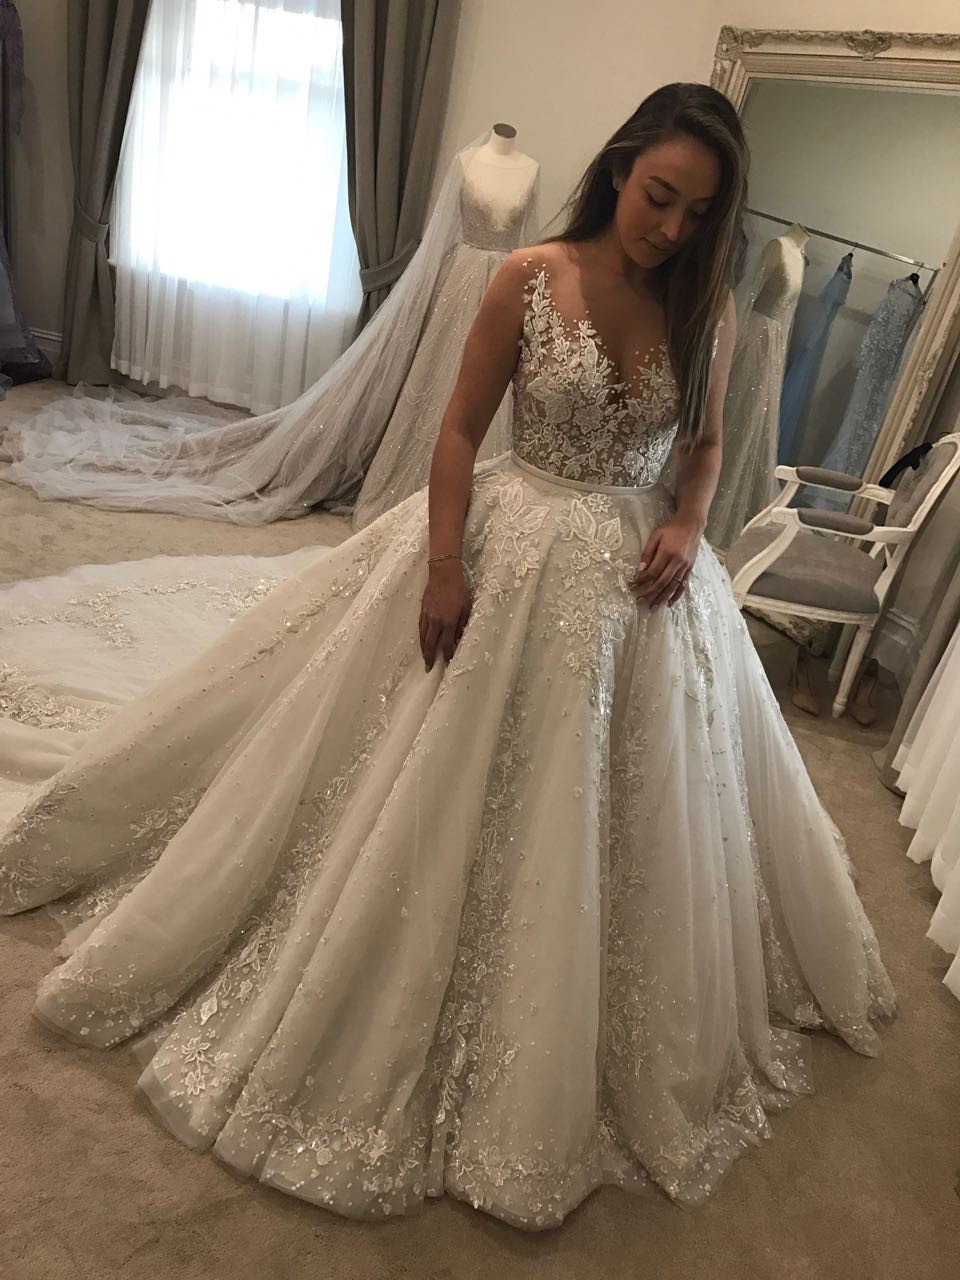 Best Paolo Sebastian Wedding Dress of all time Check it out now 